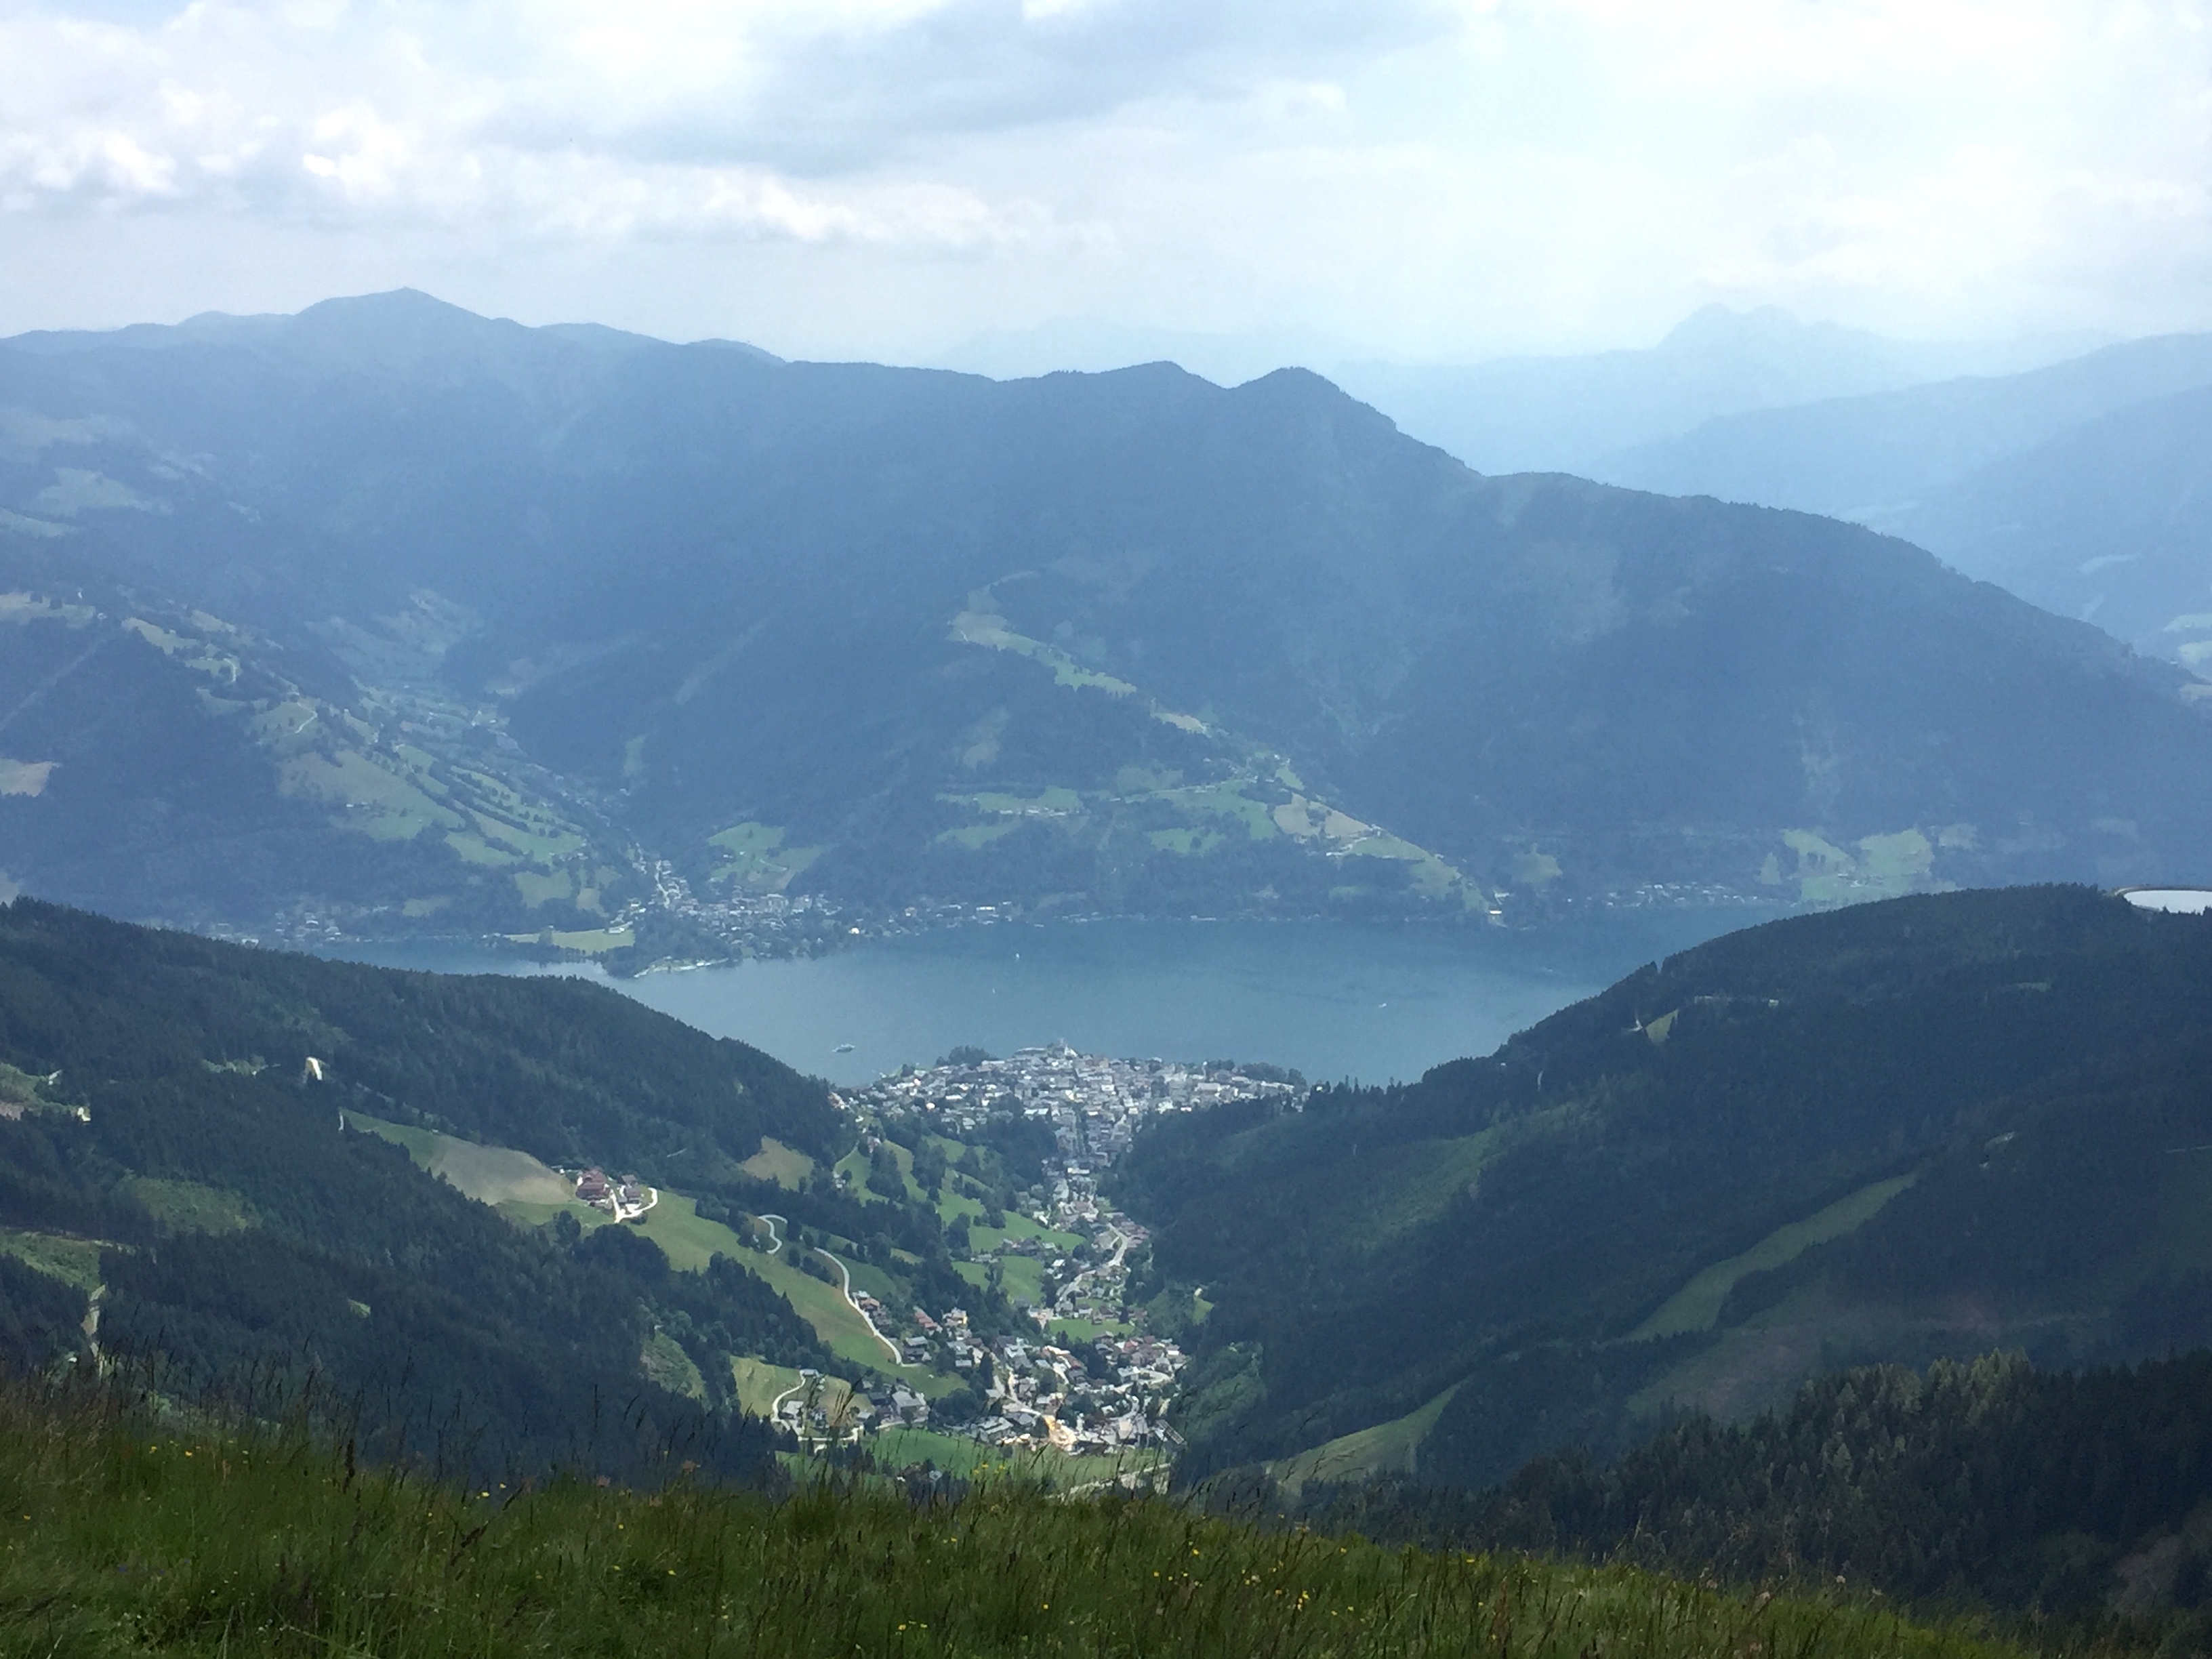 Zell am See nestles by its lake